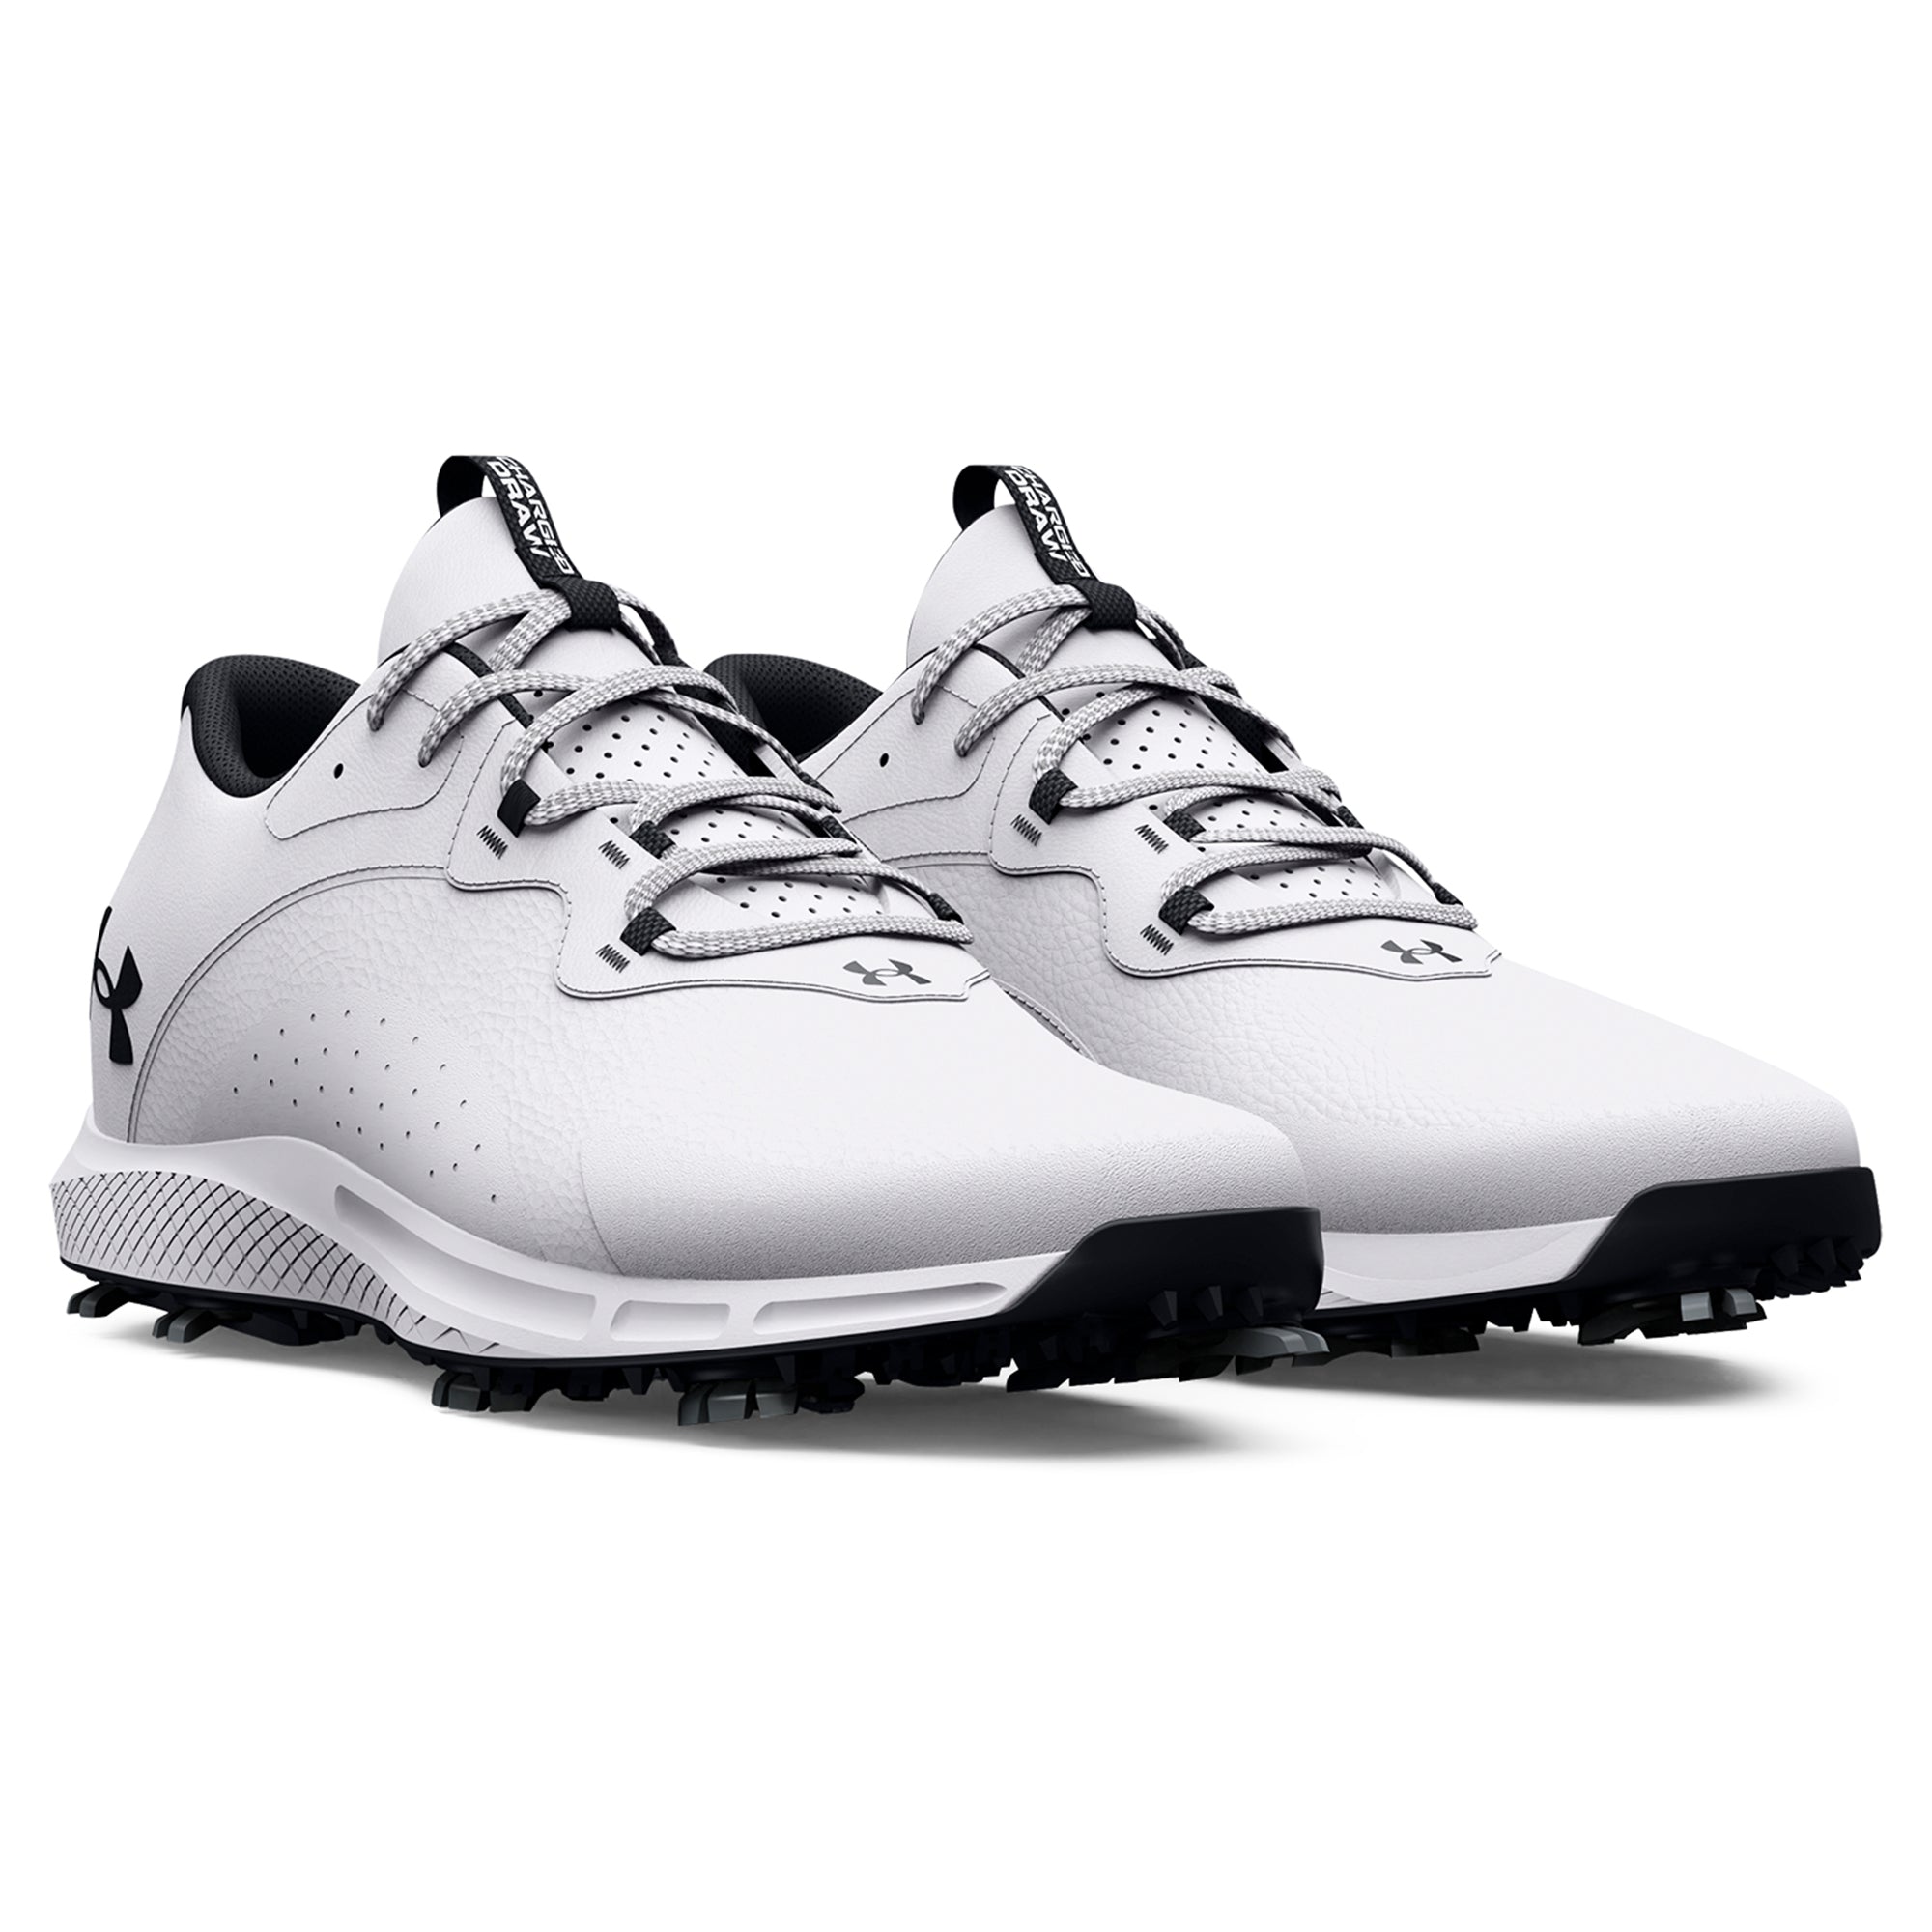 Under Armour Charged Draw 2 E Golf Shoes 3026401 White 100 & Function18